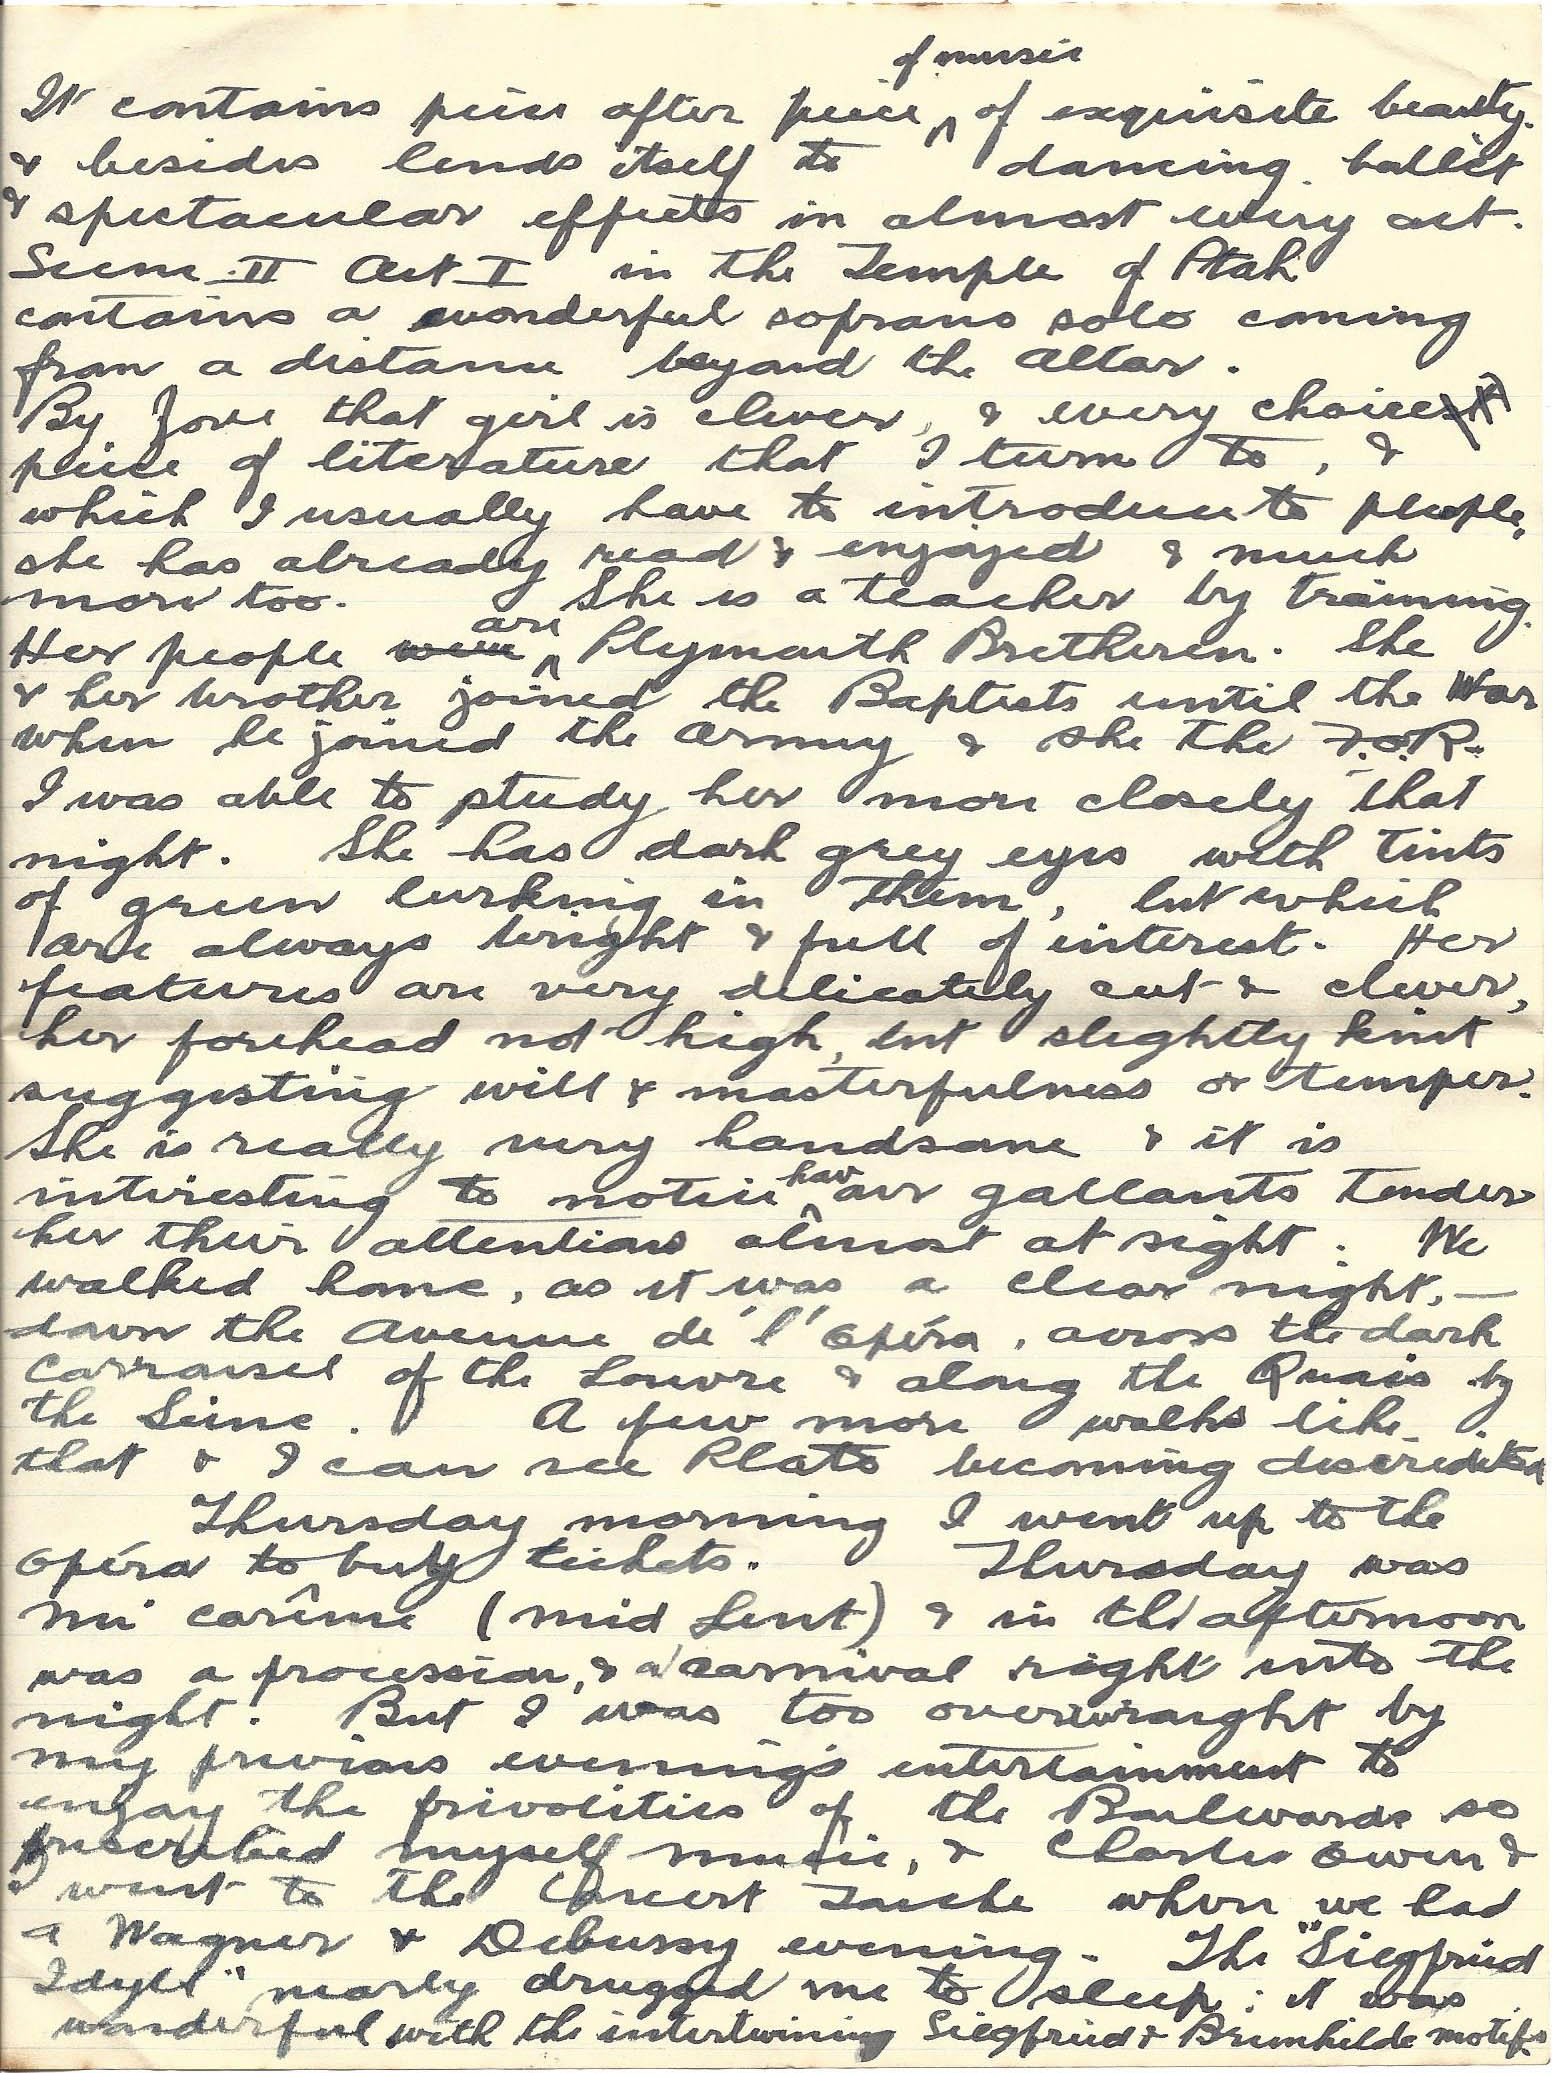 1920-03-14 p2 Donald Bearman letter to his father